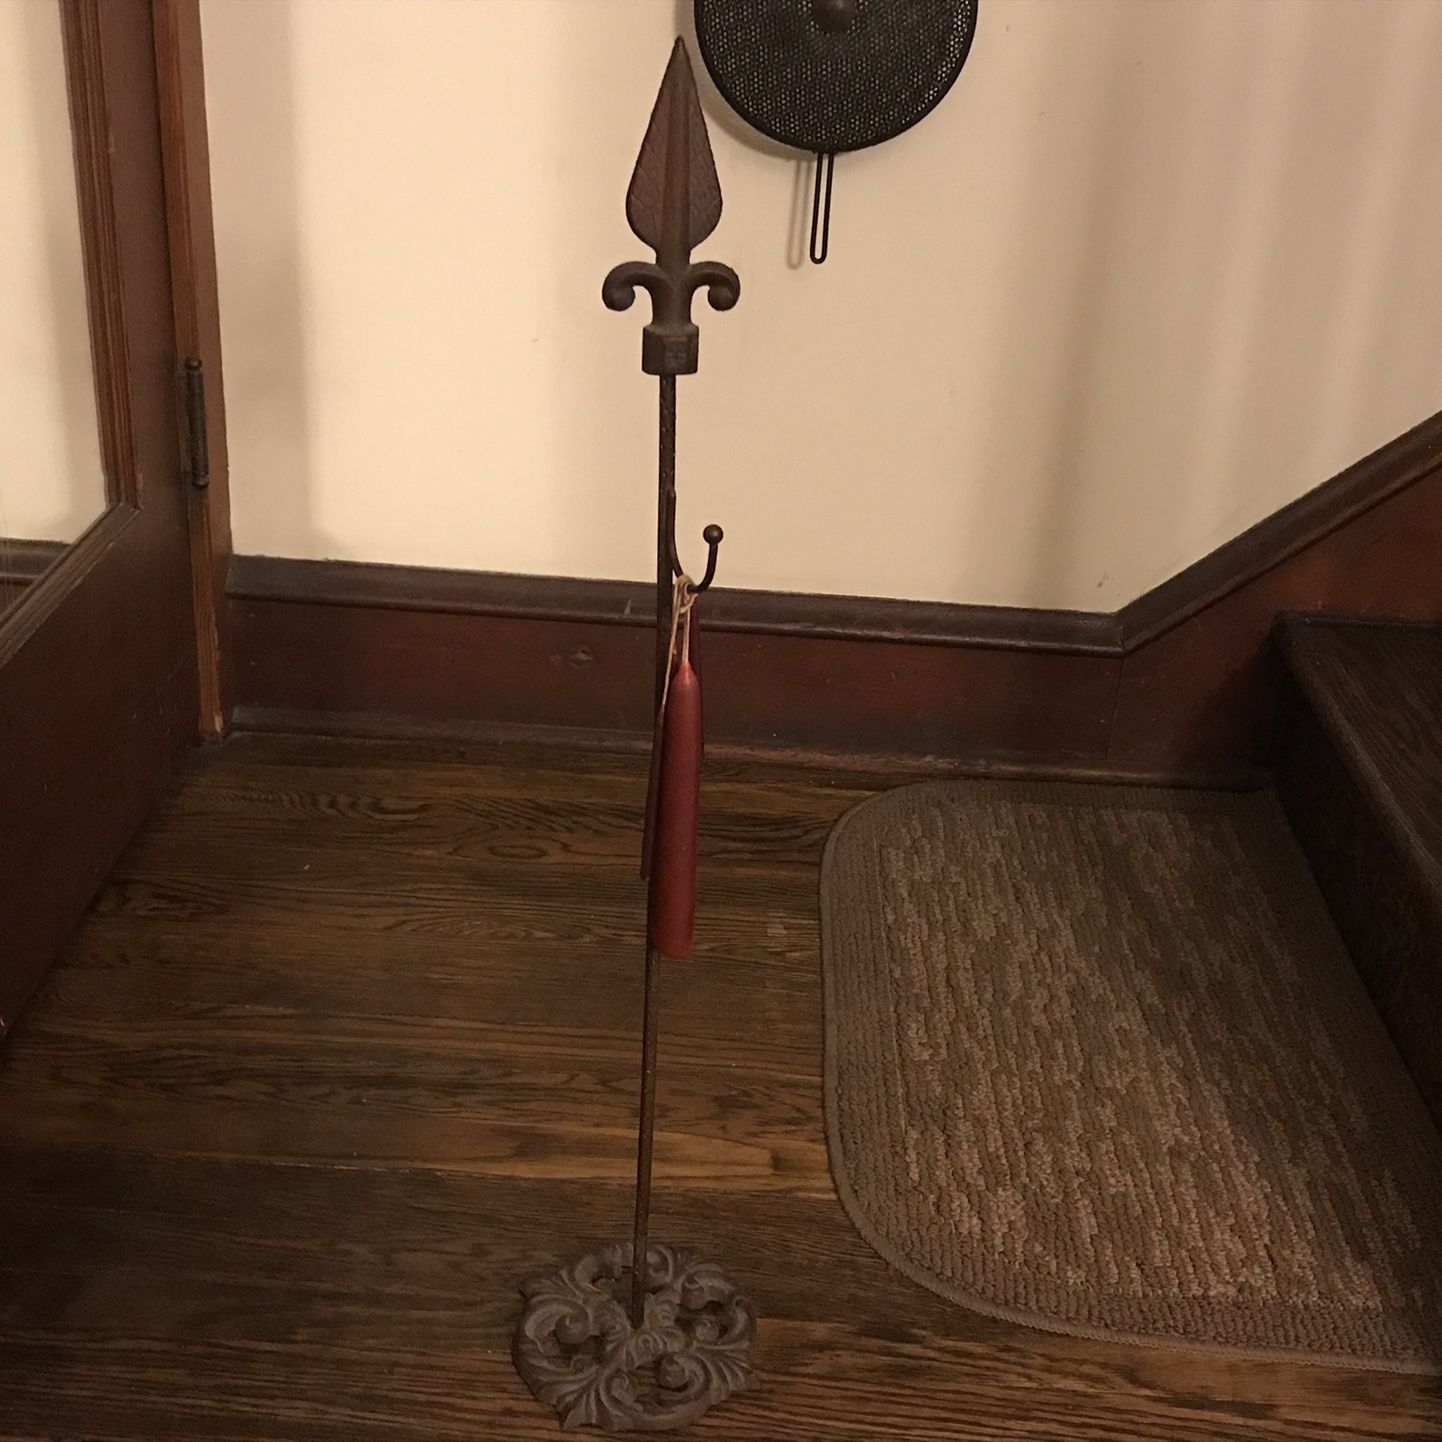 DECOR , SPEAR HEAD CANDLE HOLDER DECOR , UNIQUE , GREAT CONDITION , GREAT LOOKING DETAIL , COOL LOOKING PIECE . $15 CASH OBO